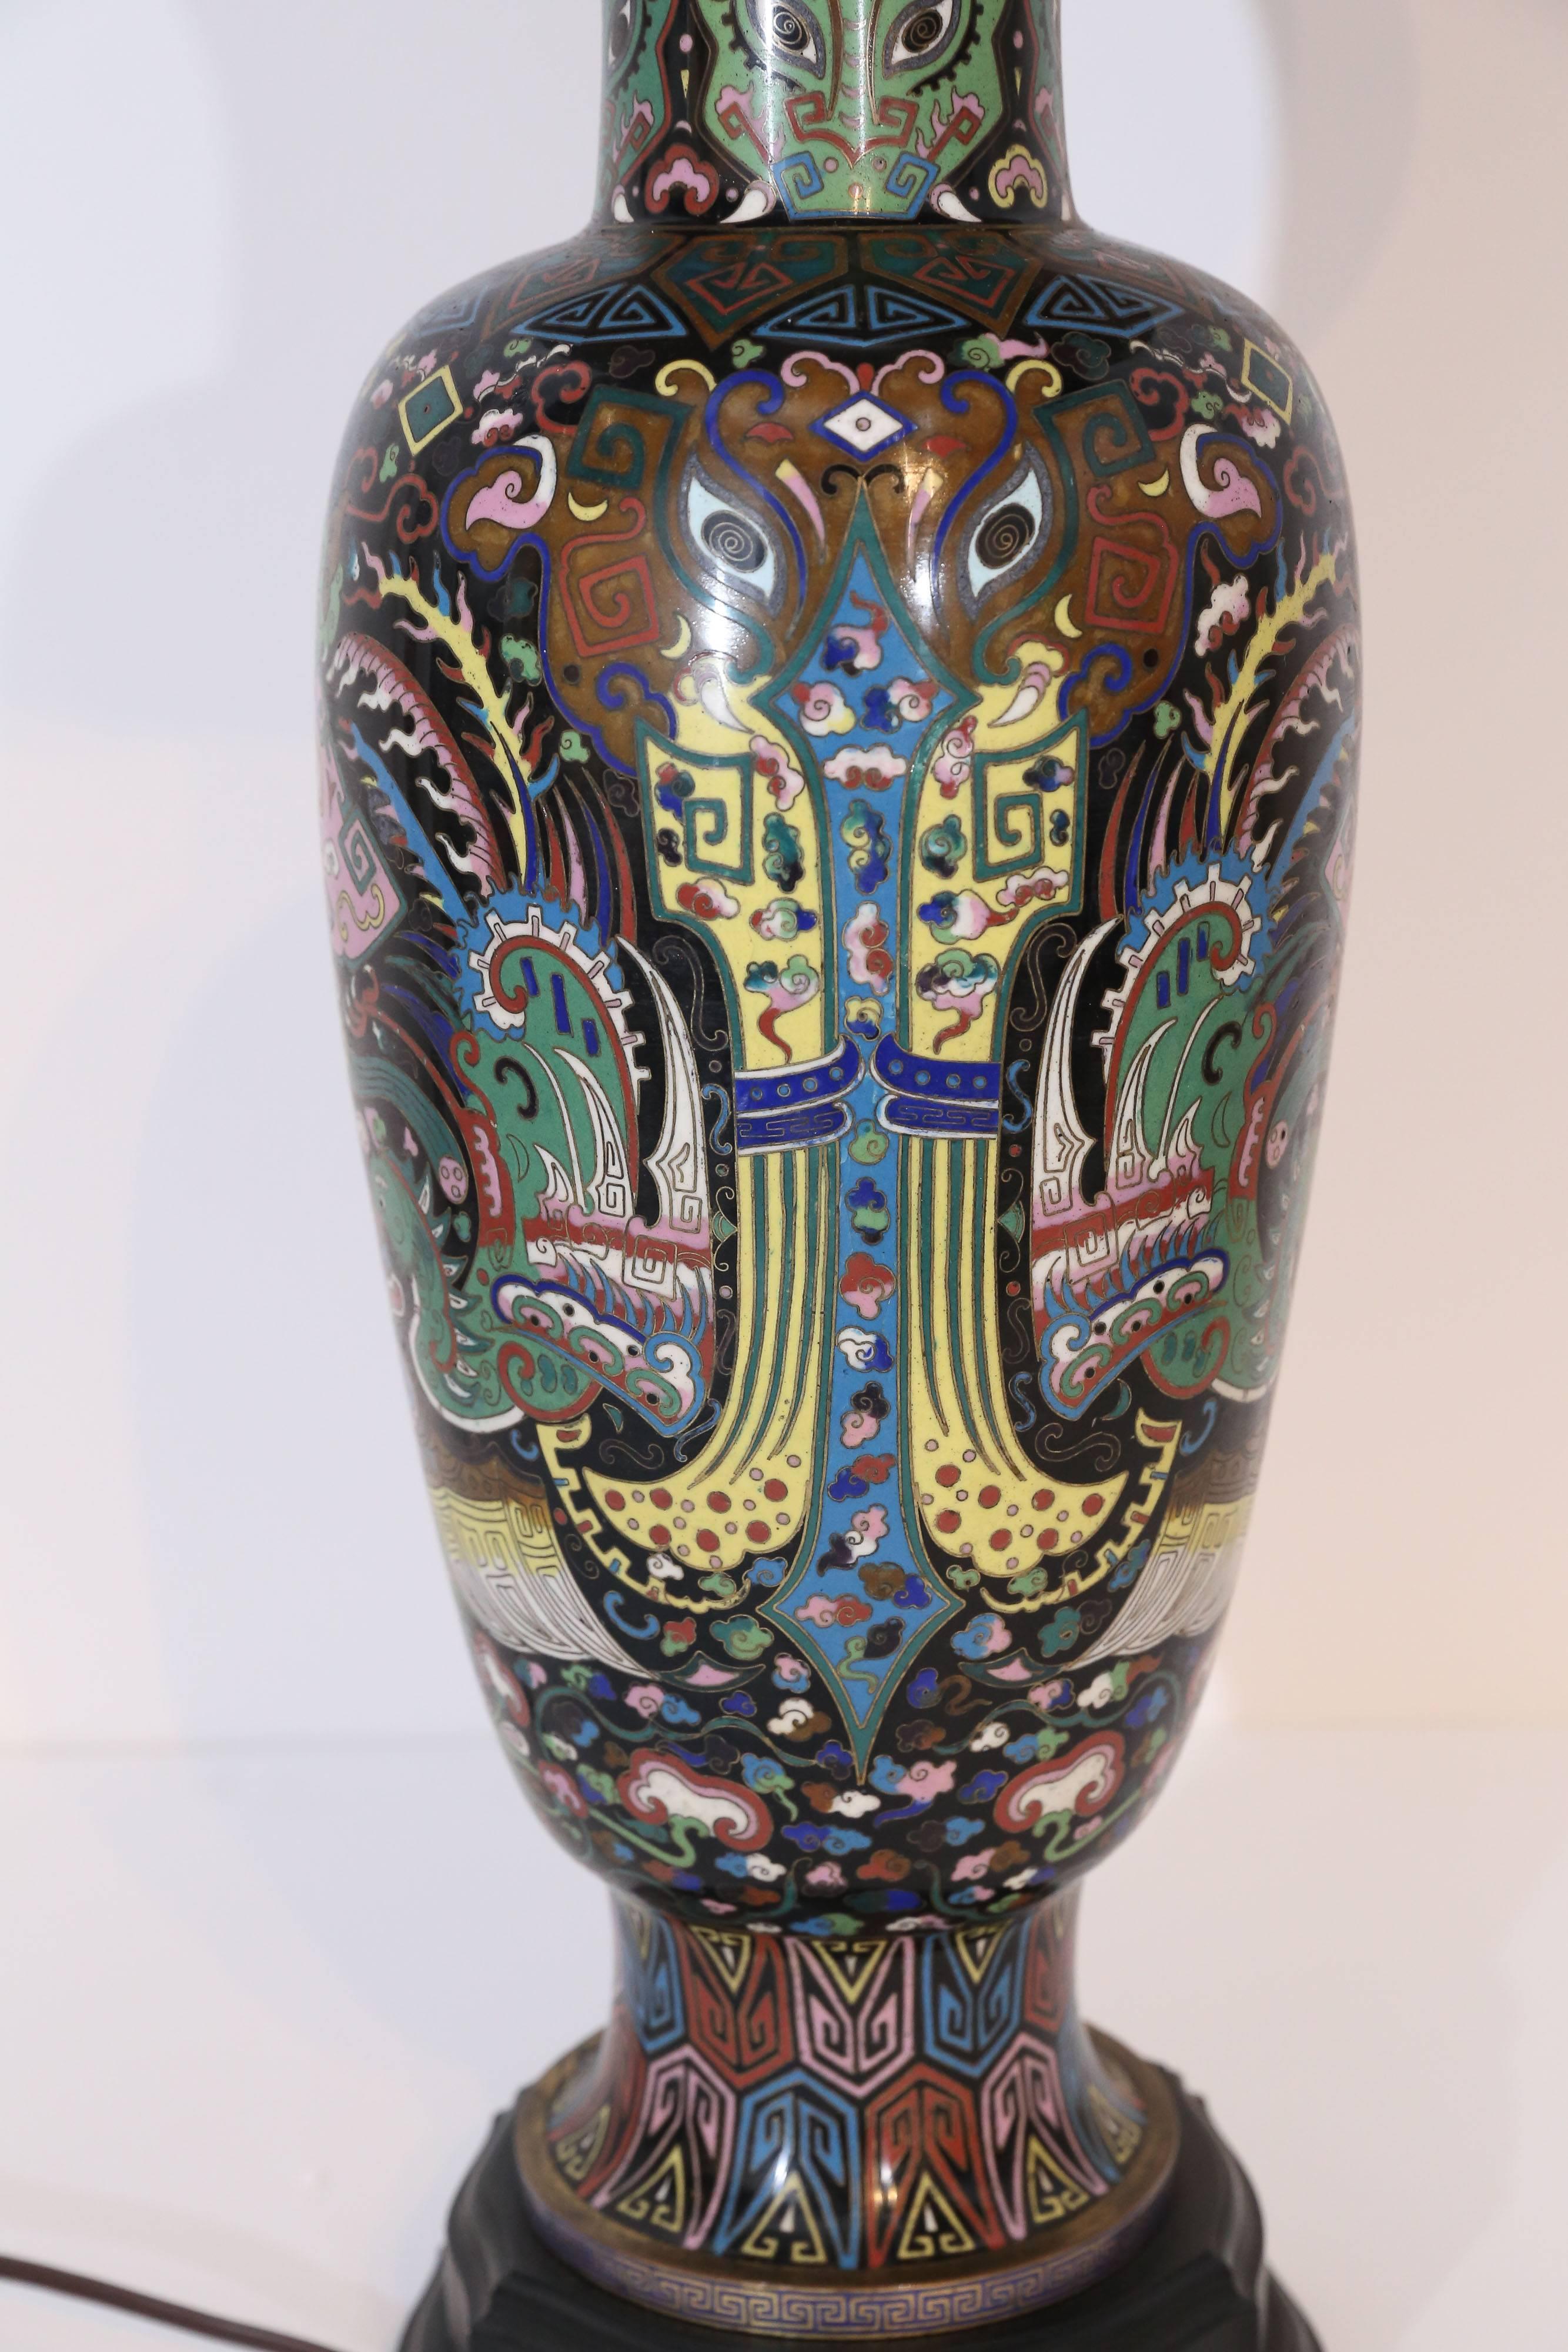 This exquisite cloisonne enameled lamp started its life as a vase. The detailed design of the vase in pastel pink, lavender, red, blue with a black background among others is supported on a carved tiered Stand. Light green carved globe jade finial